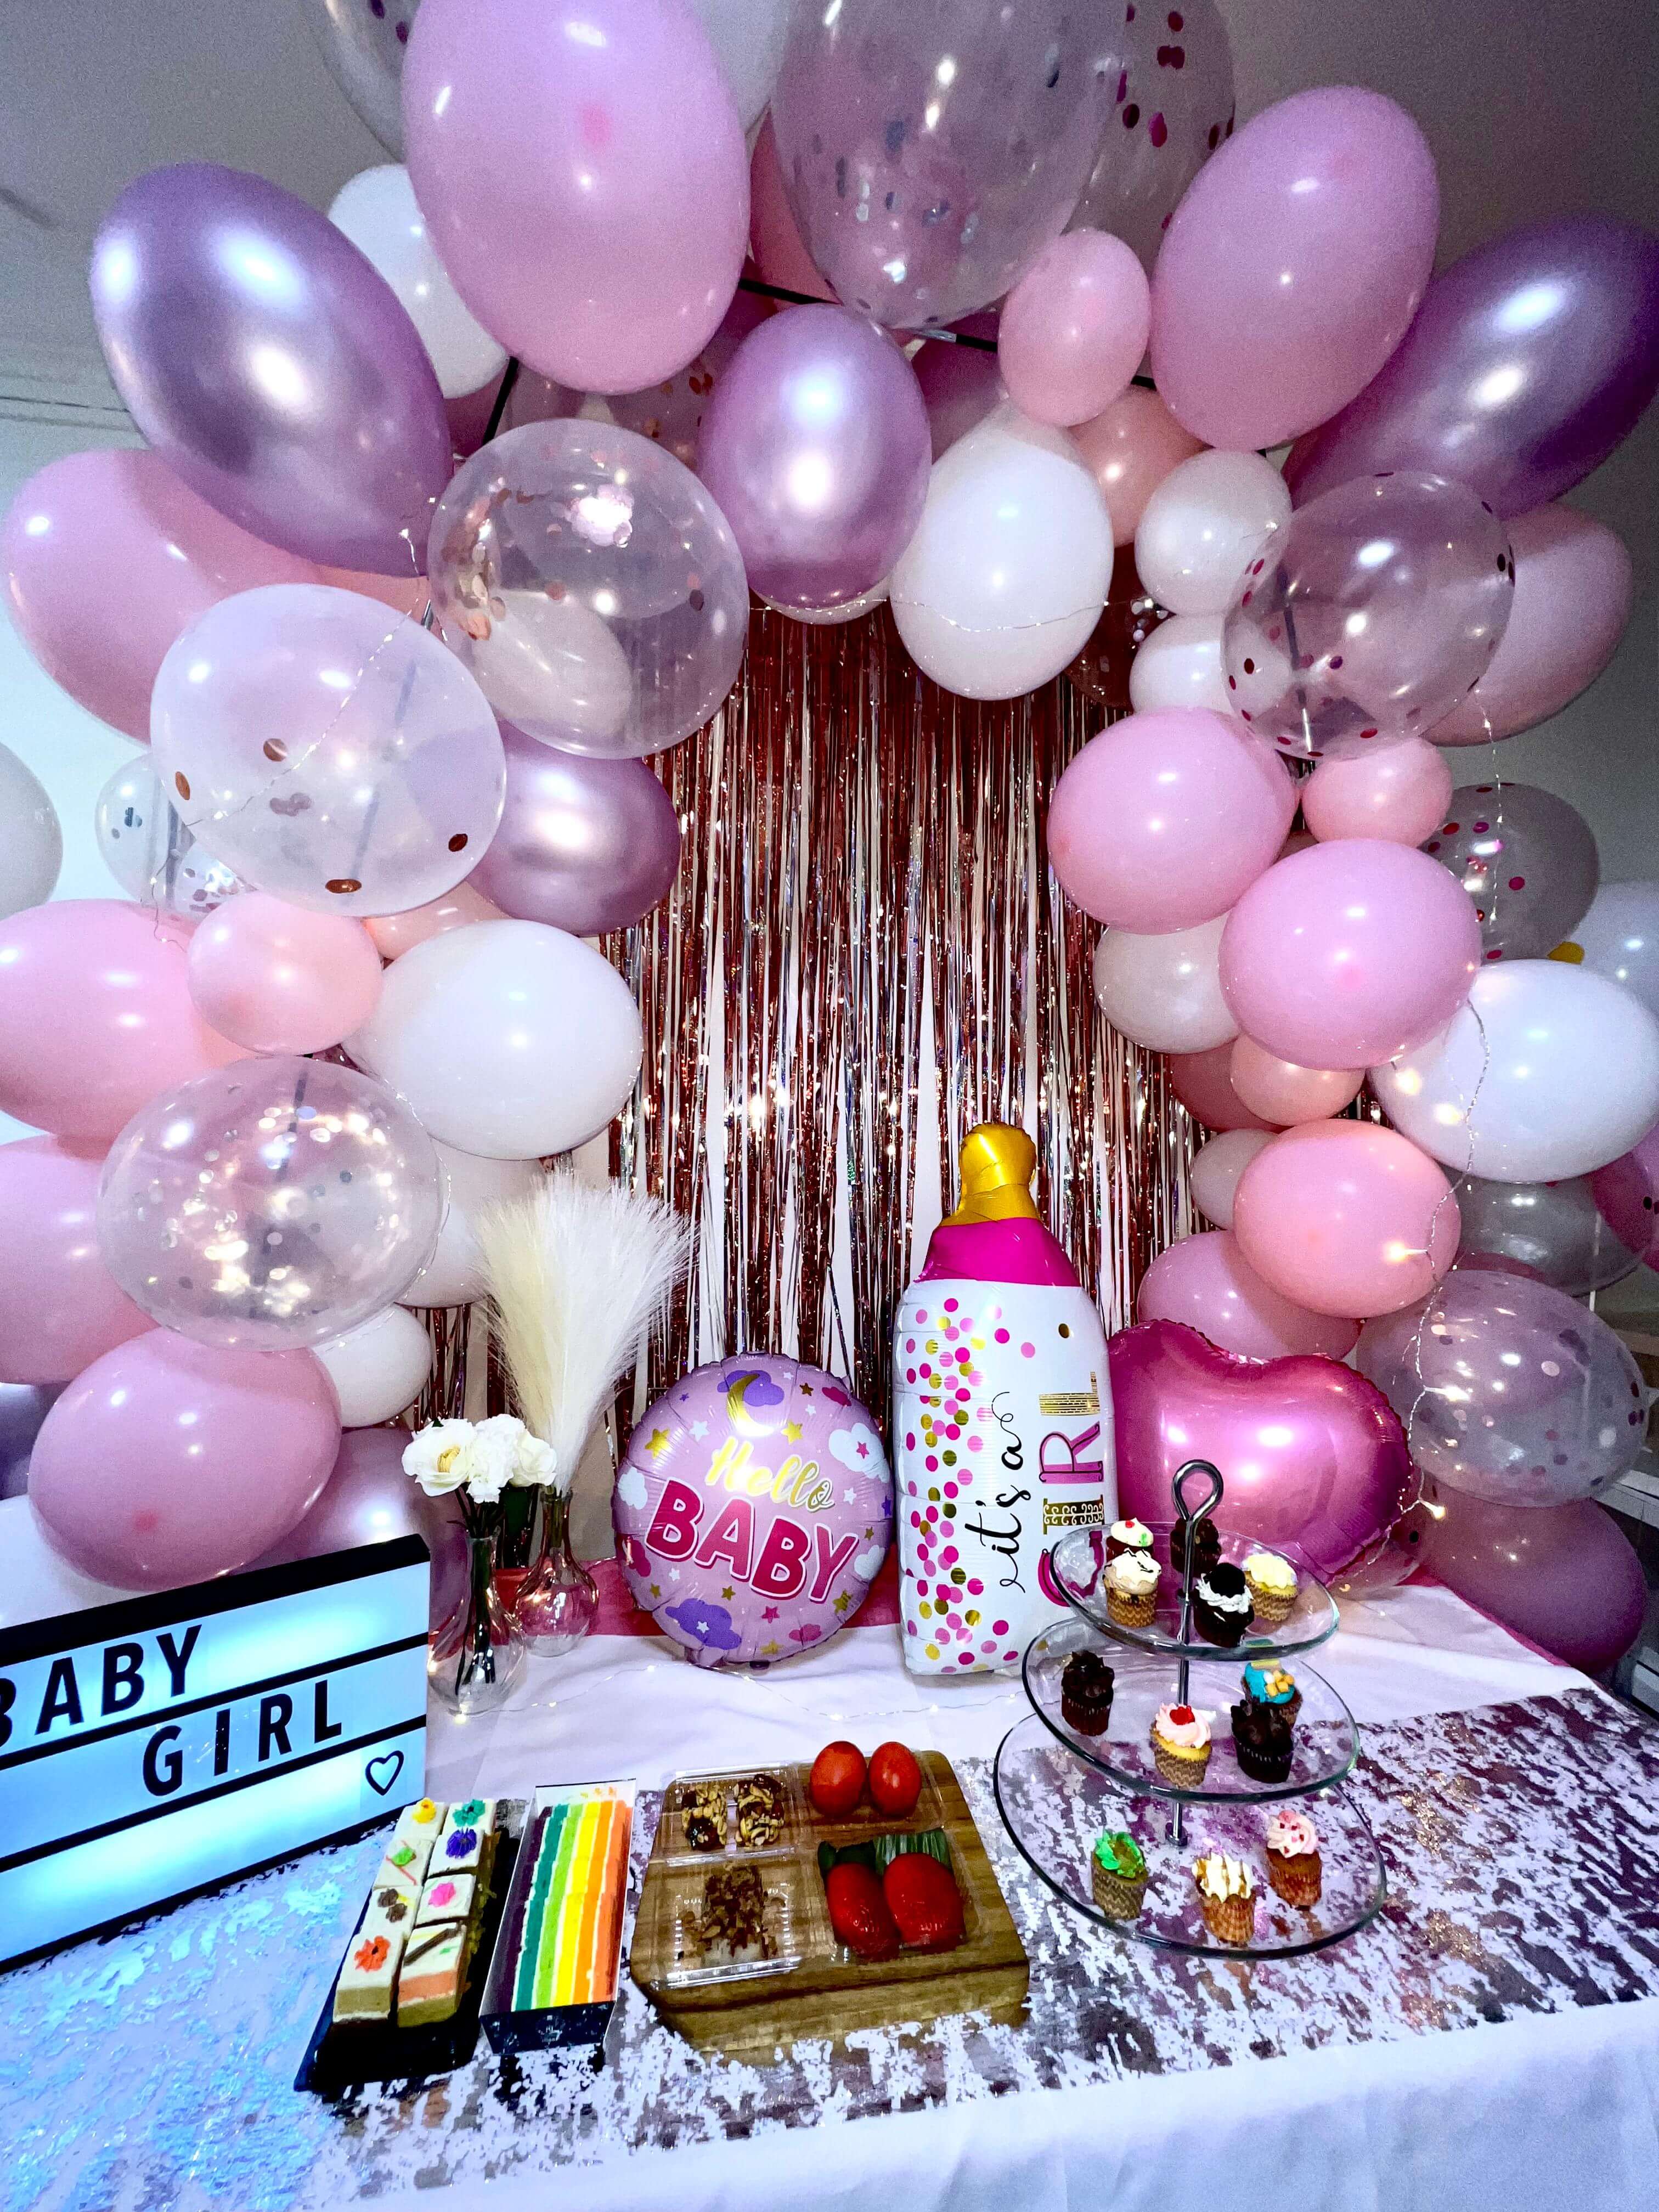 Girl baby shower decorations event planner. Discover creative baby shower ideas and pretty decorations for a memorable baby shower celebration. Explore our selection at SEA Events now!